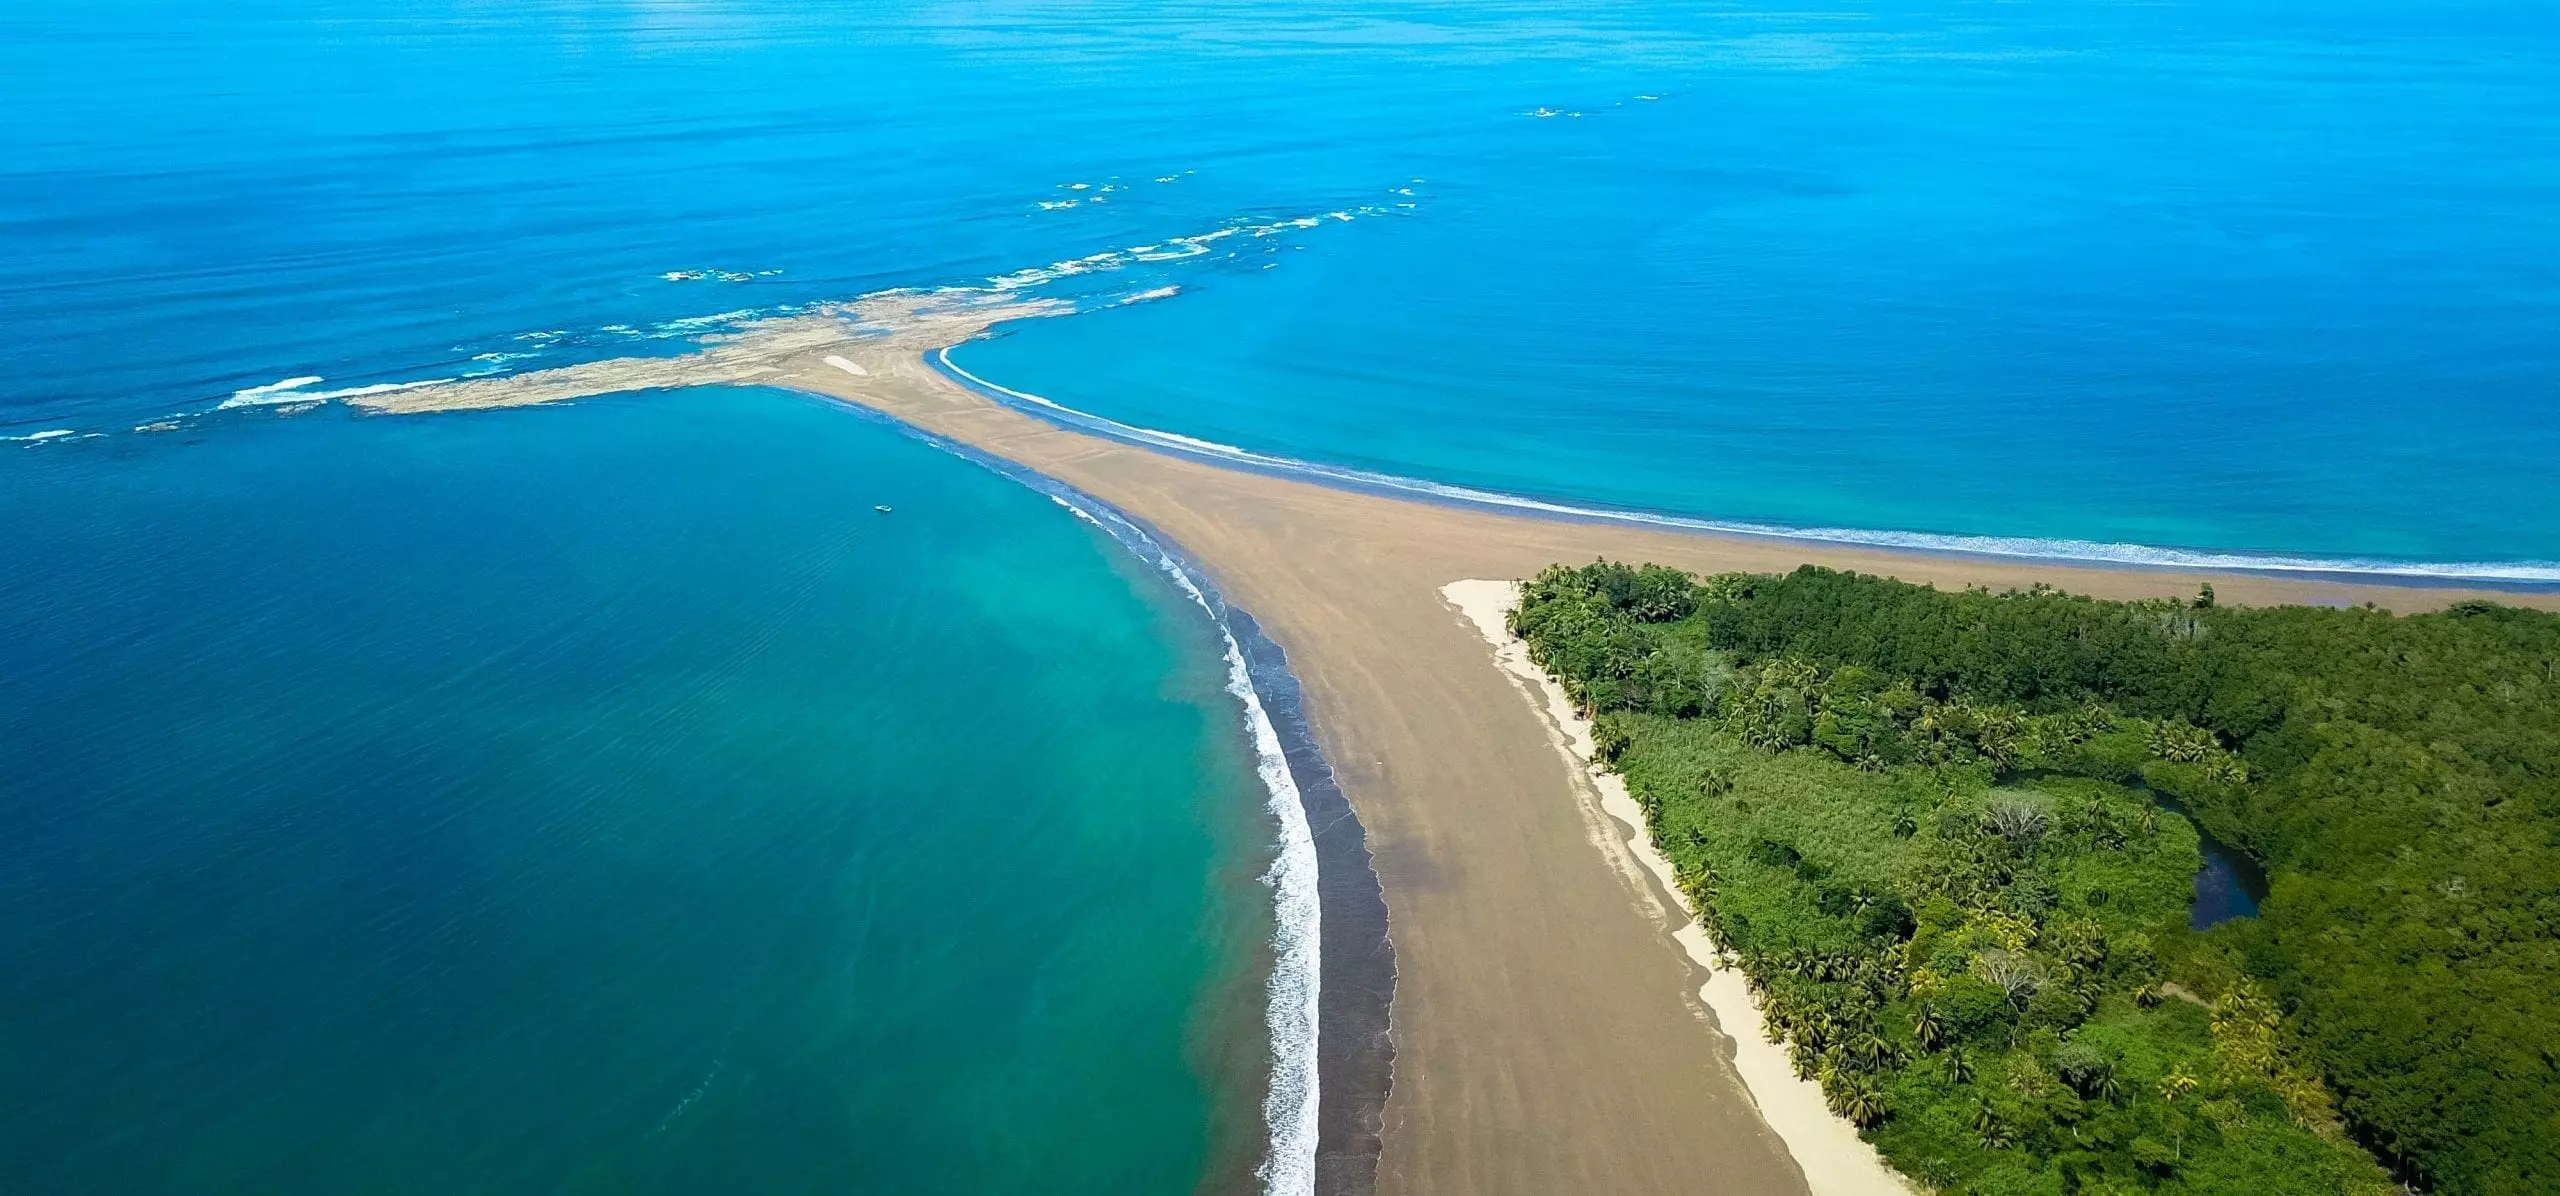 View of the Whales Tail at the Marino Ballena National Park in Uvita Costa Rica